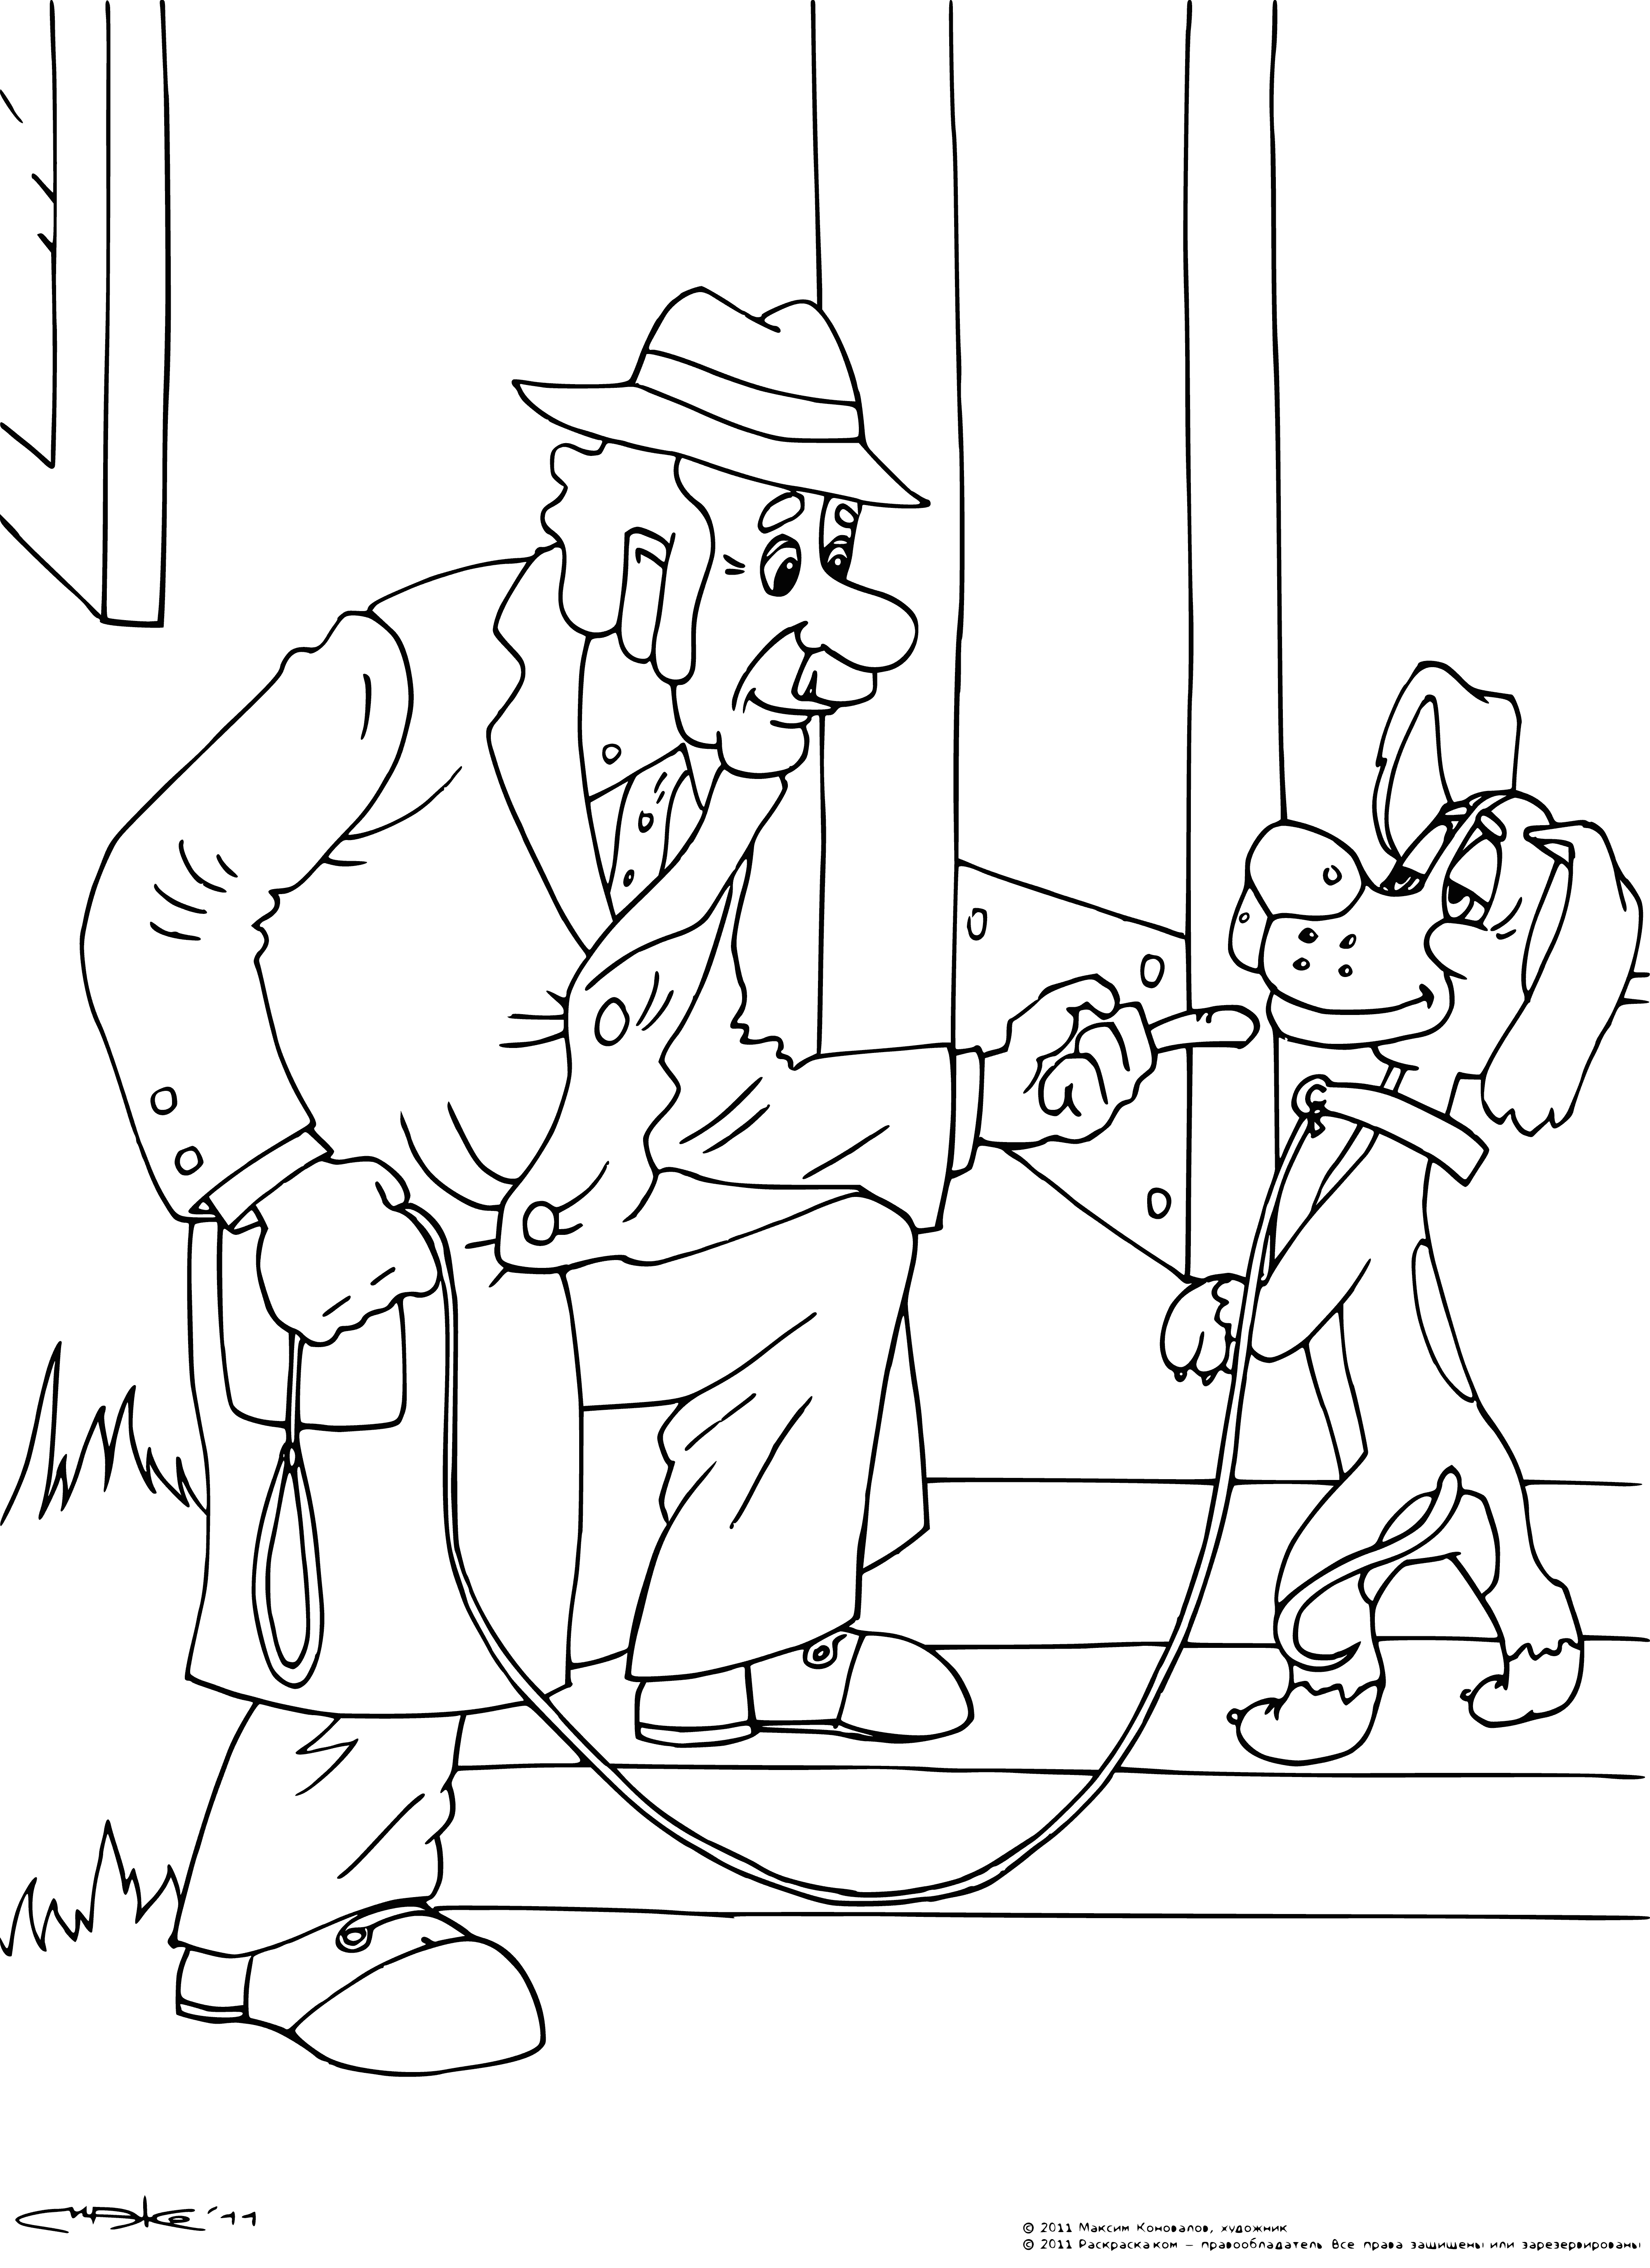 coloring page: Bobik the dog is visiting Barbos, having lots of fun with the big pup and staying for the owner. #bobik #barbos